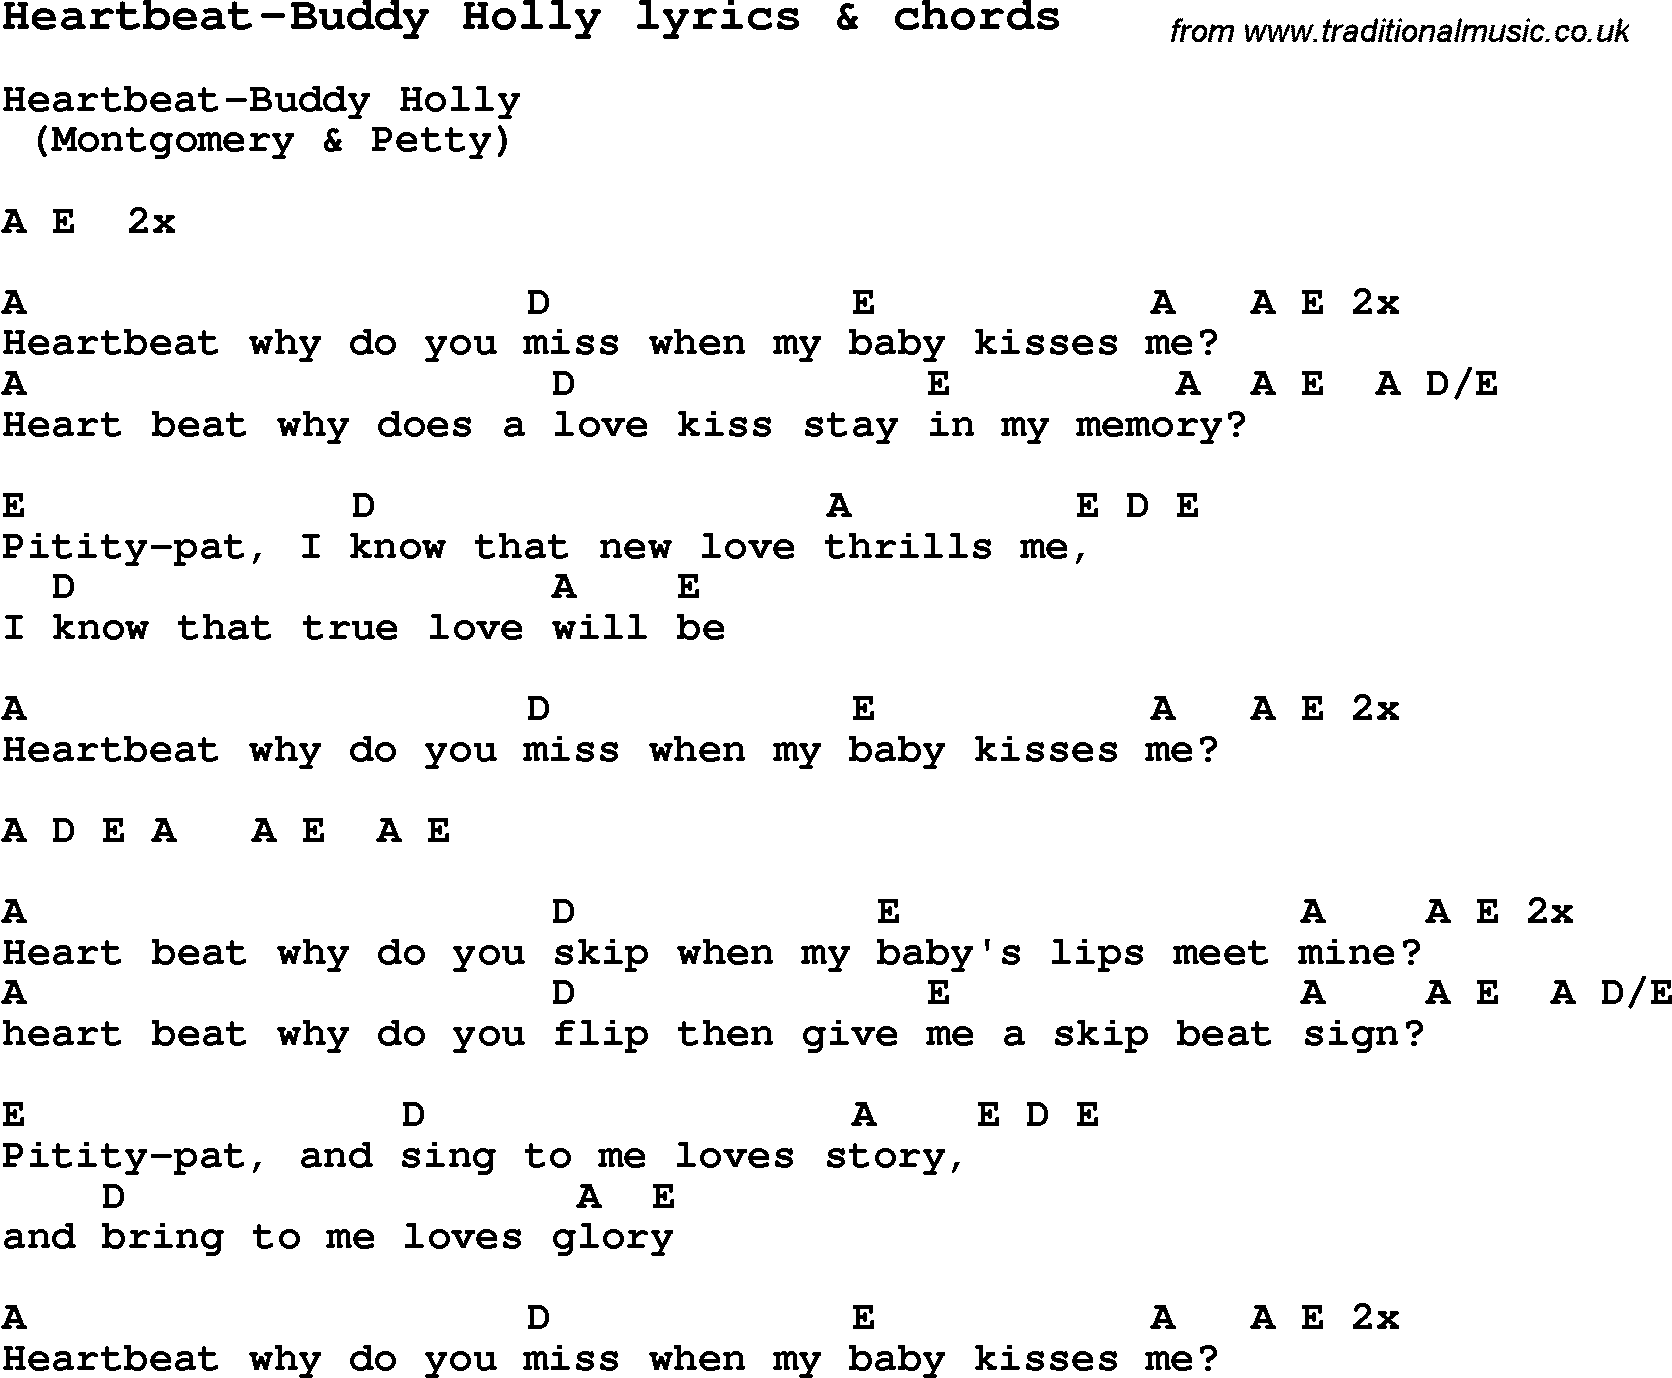 Love Song Lyrics for: Heartbeat-Buddy Holly with chords for Ukulele, Guitar Banjo etc.